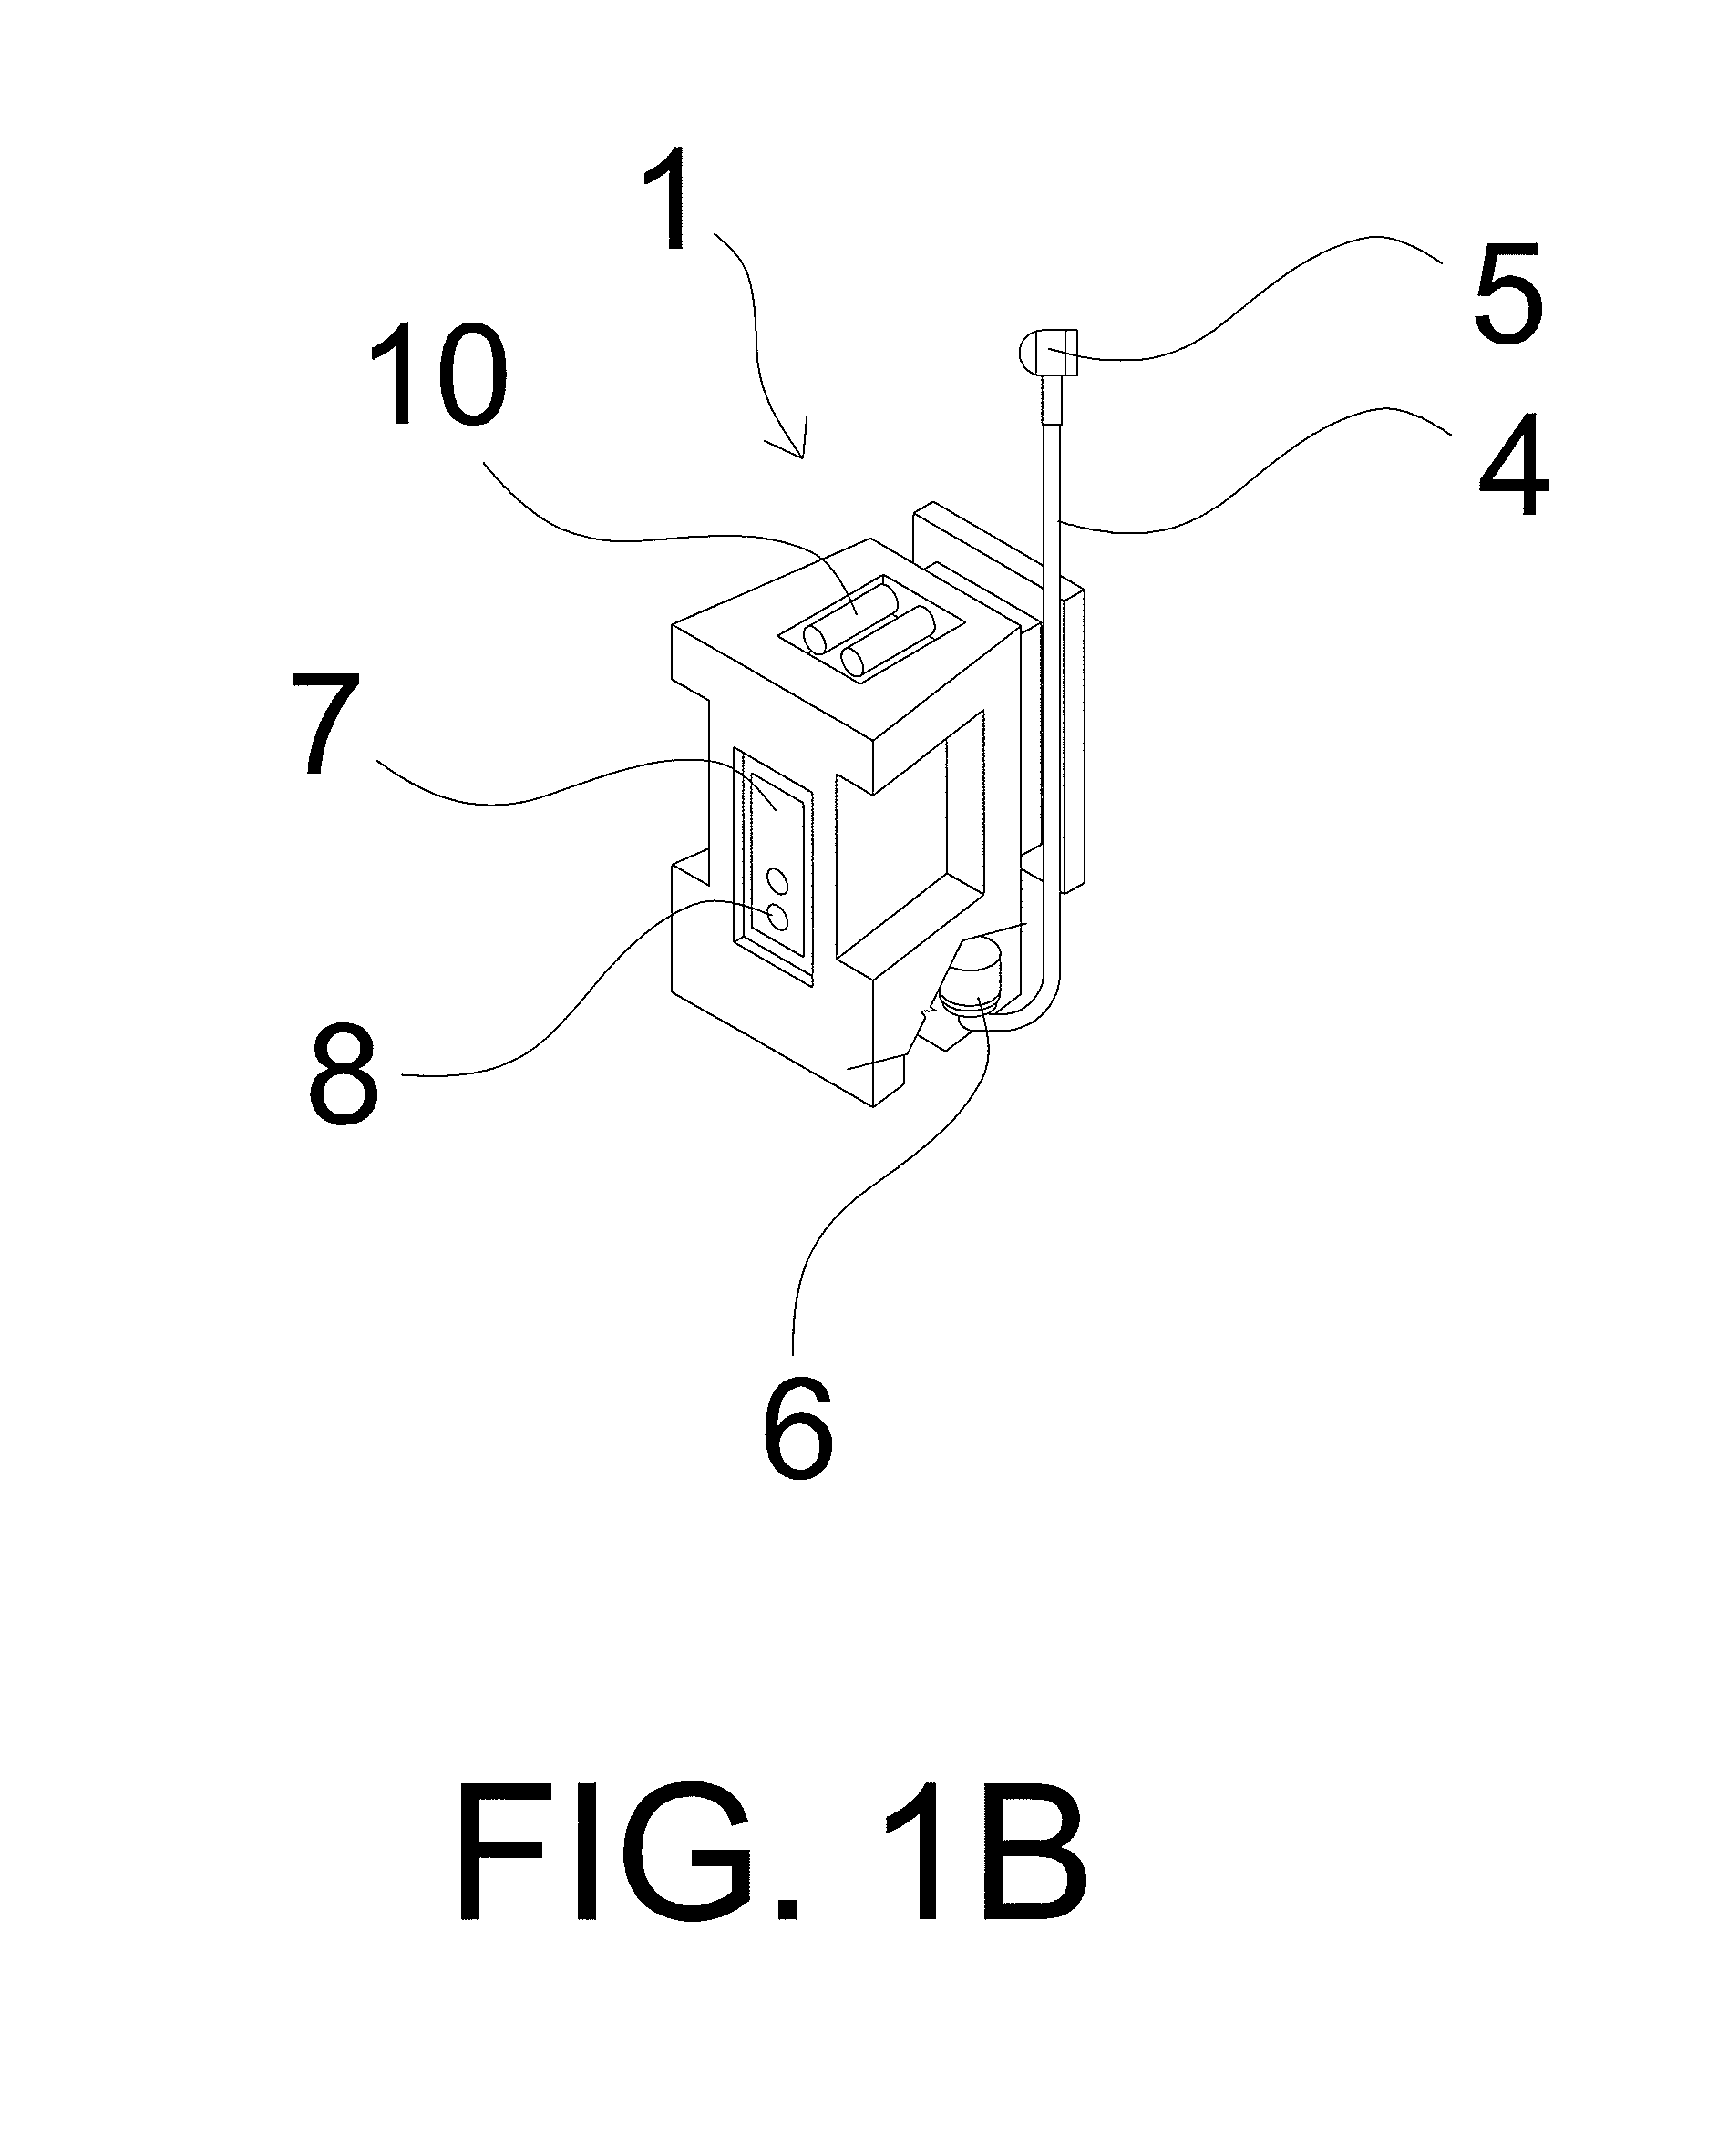 Automotive service equipment and method for brake fluid exchange with wireless brake bleeding system